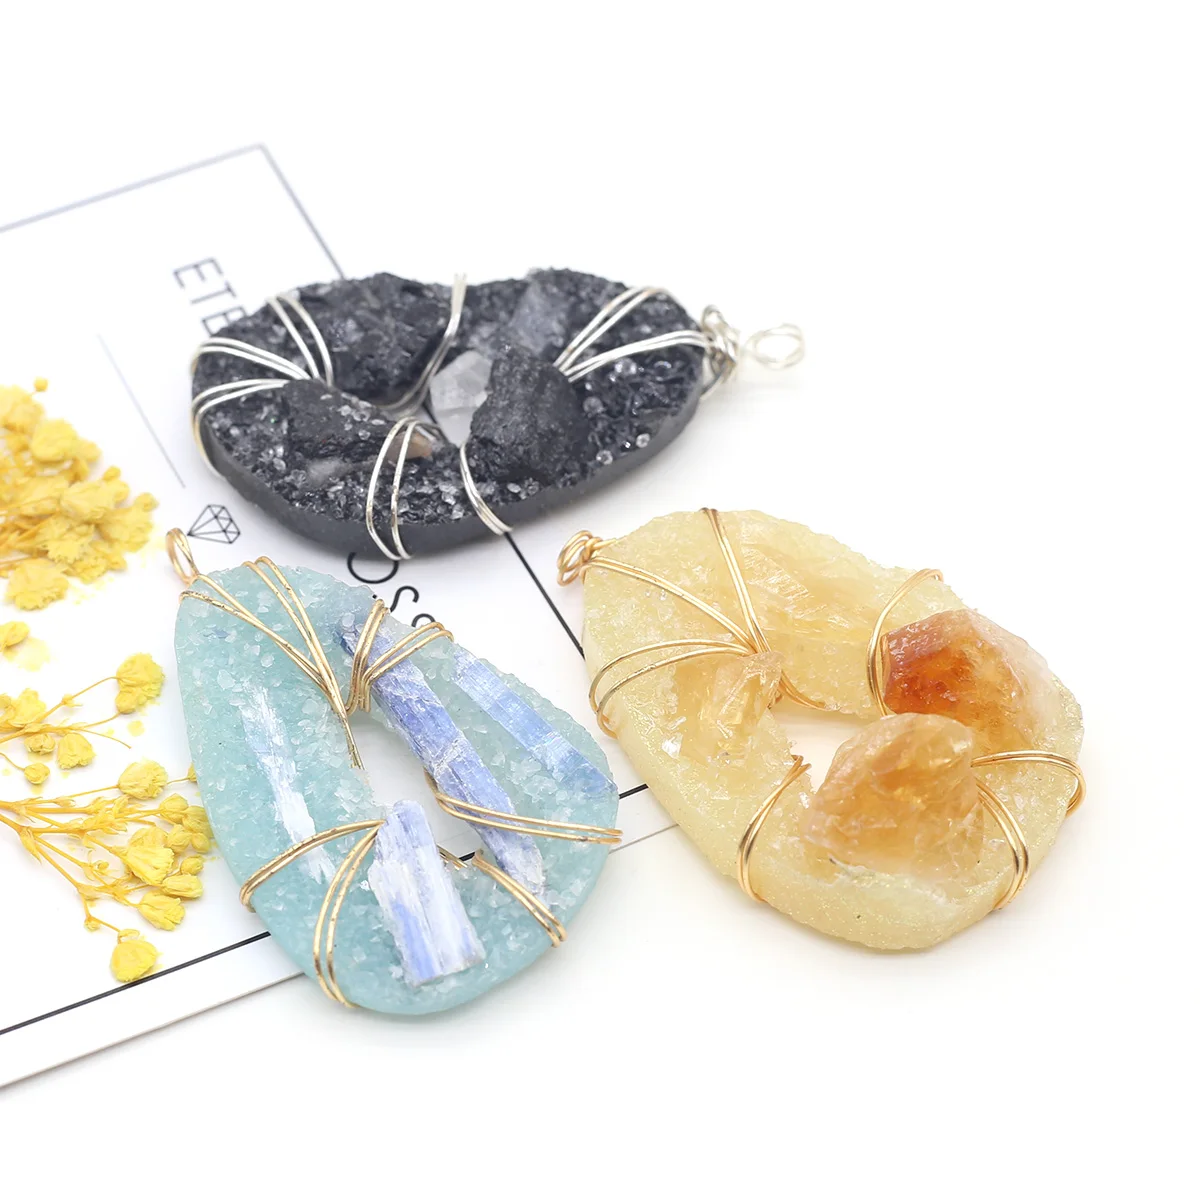 

1PC Natural Citrine Stone Pendant Resin Winding Blue Black Handwork Healing Crystal Charms for Jewelry Making DIY Necklaces